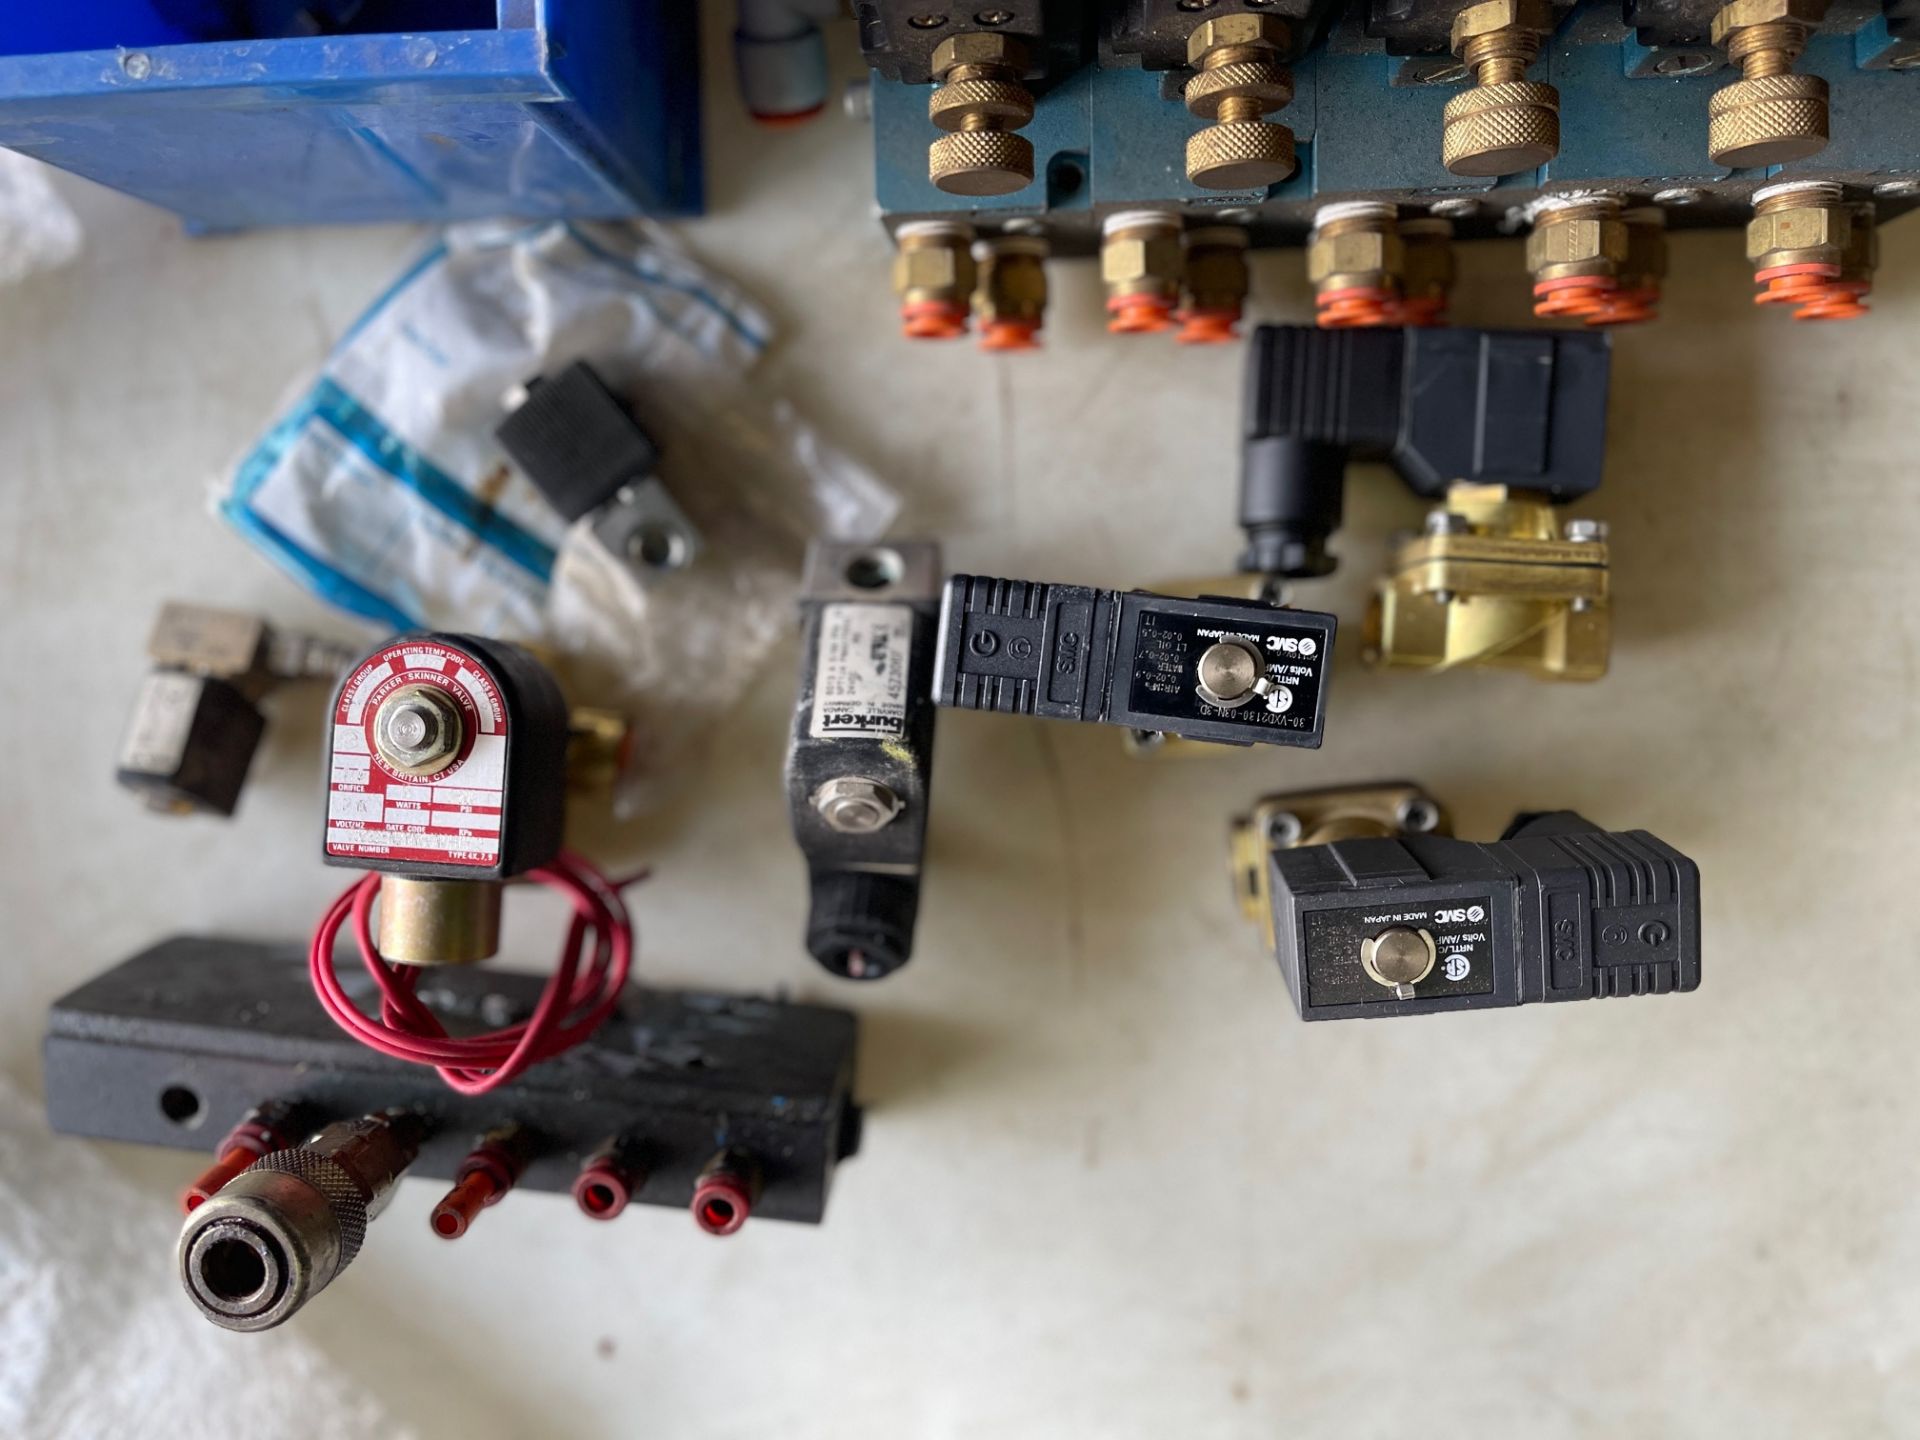 LOT/ASST OF AIR AND WATER SOLENOIDS, REGULATOR AND WATER SEPARATOR, 24 VOLTS AND 110 VOLTS COILS - Image 6 of 7